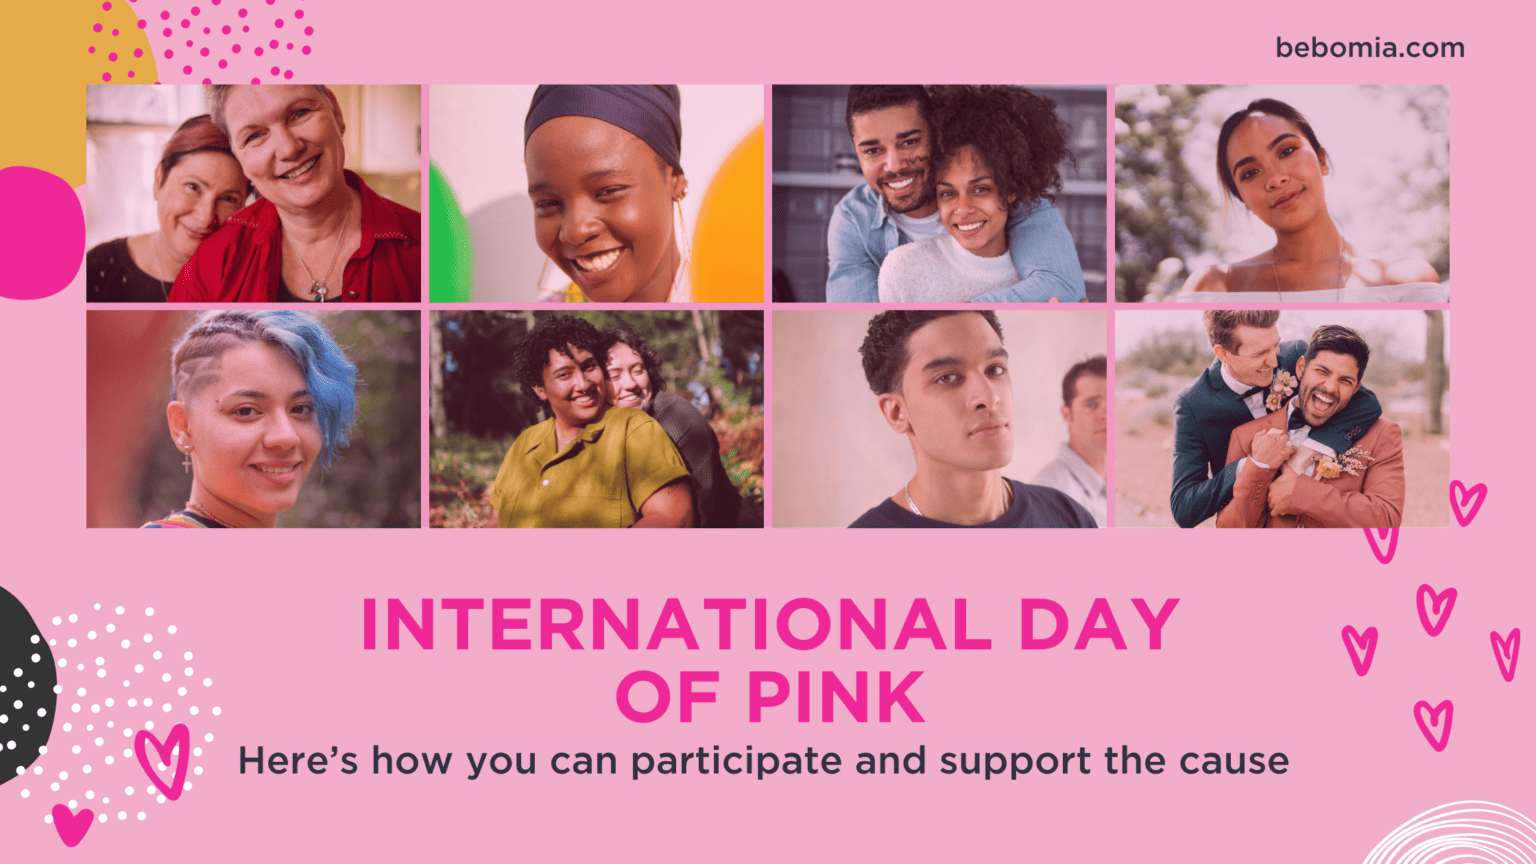 International Day of Pink how you can participate and support the cause